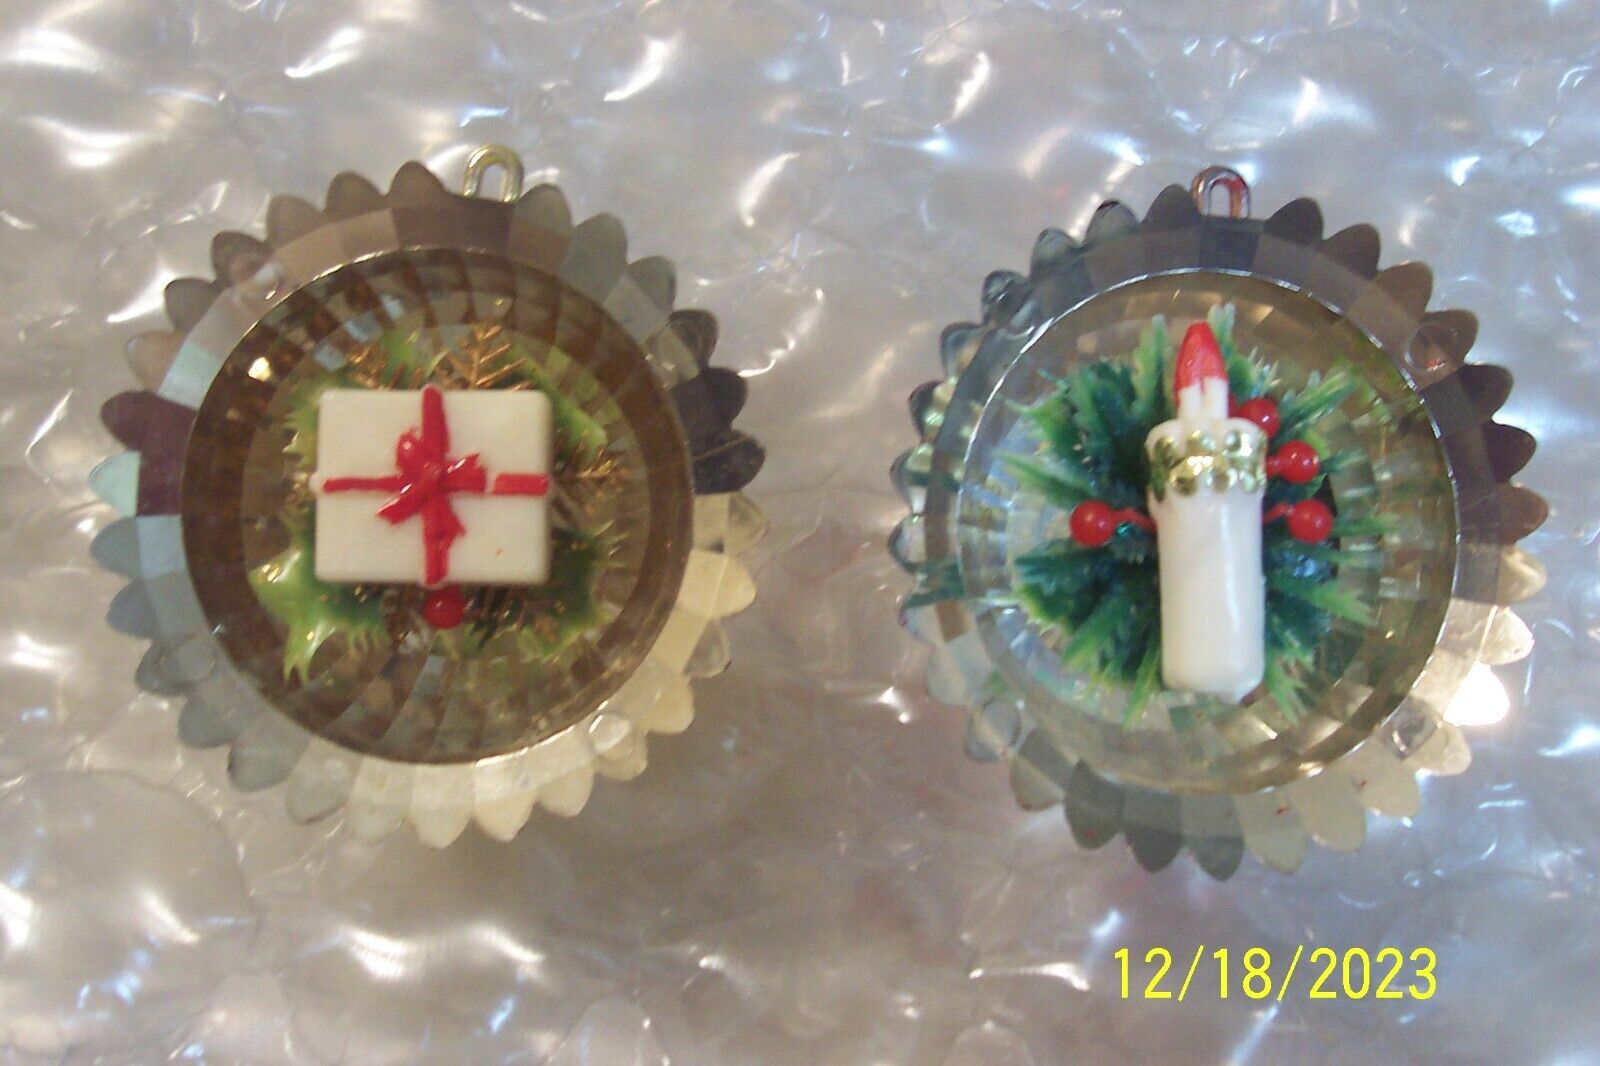 2 Vintage Jewel Brite Plastic Christmas Ornaments With Candle & Gift